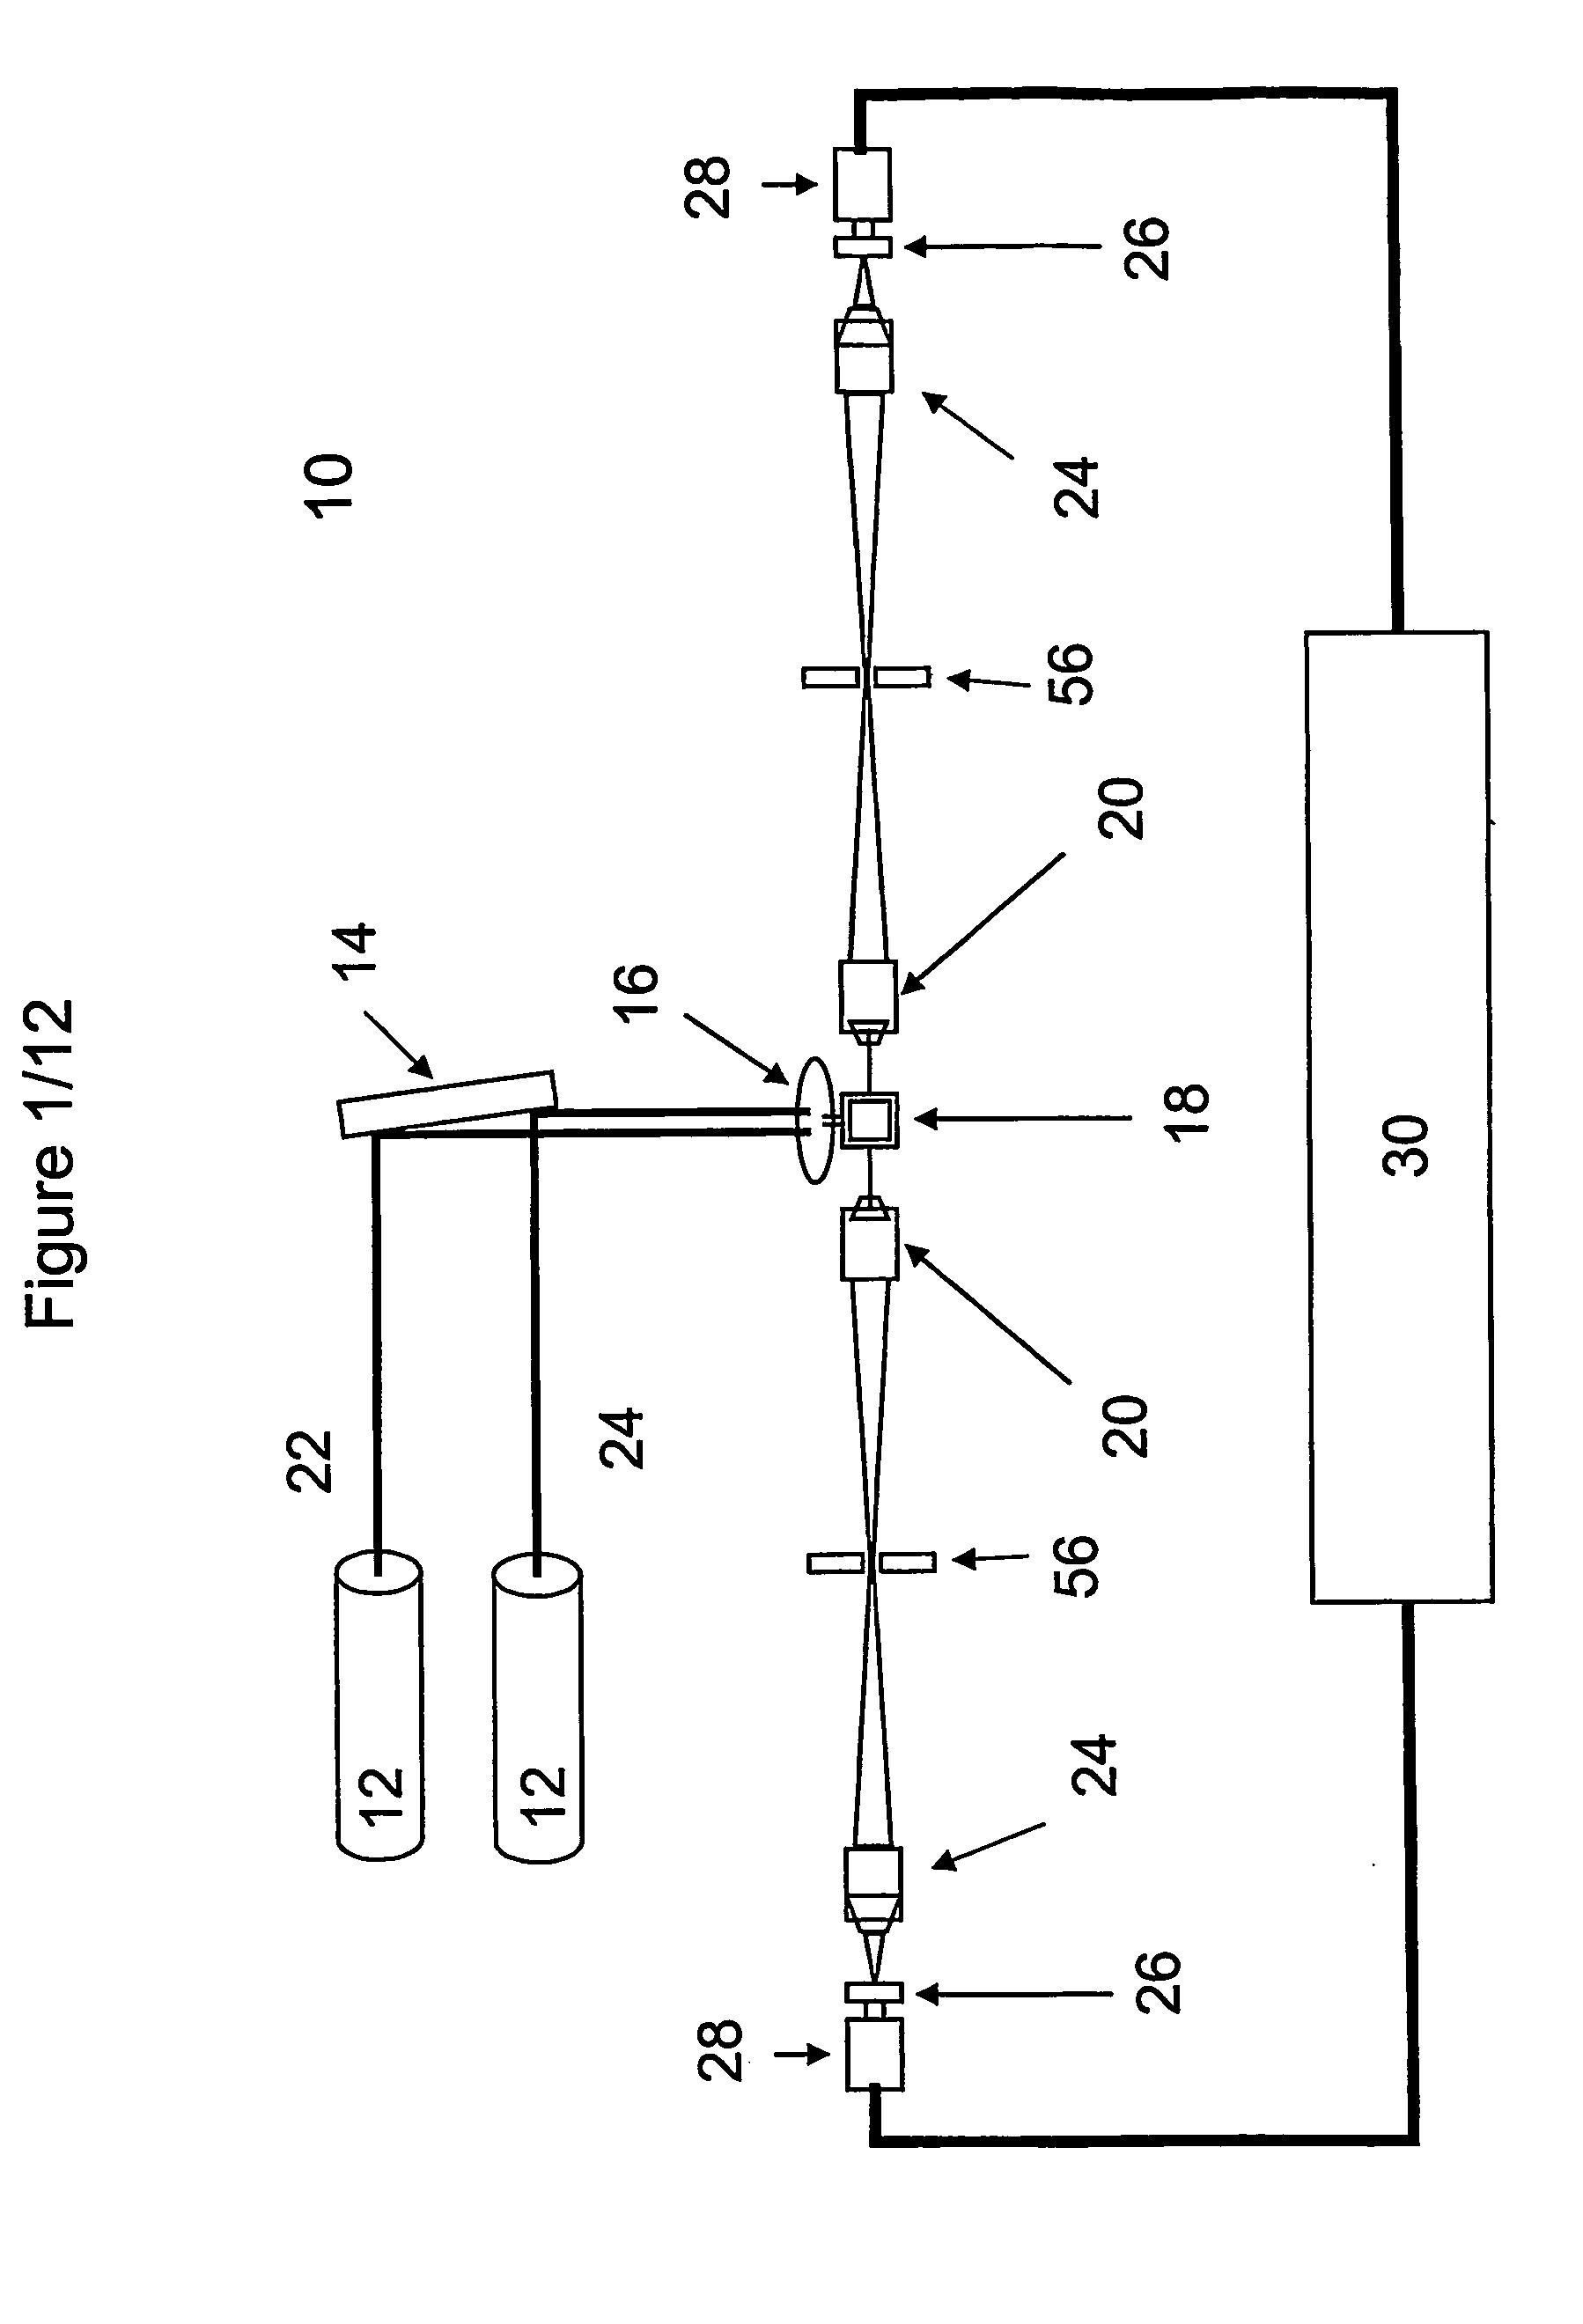 Methods for Enhancing the Analysis of Particle Detection